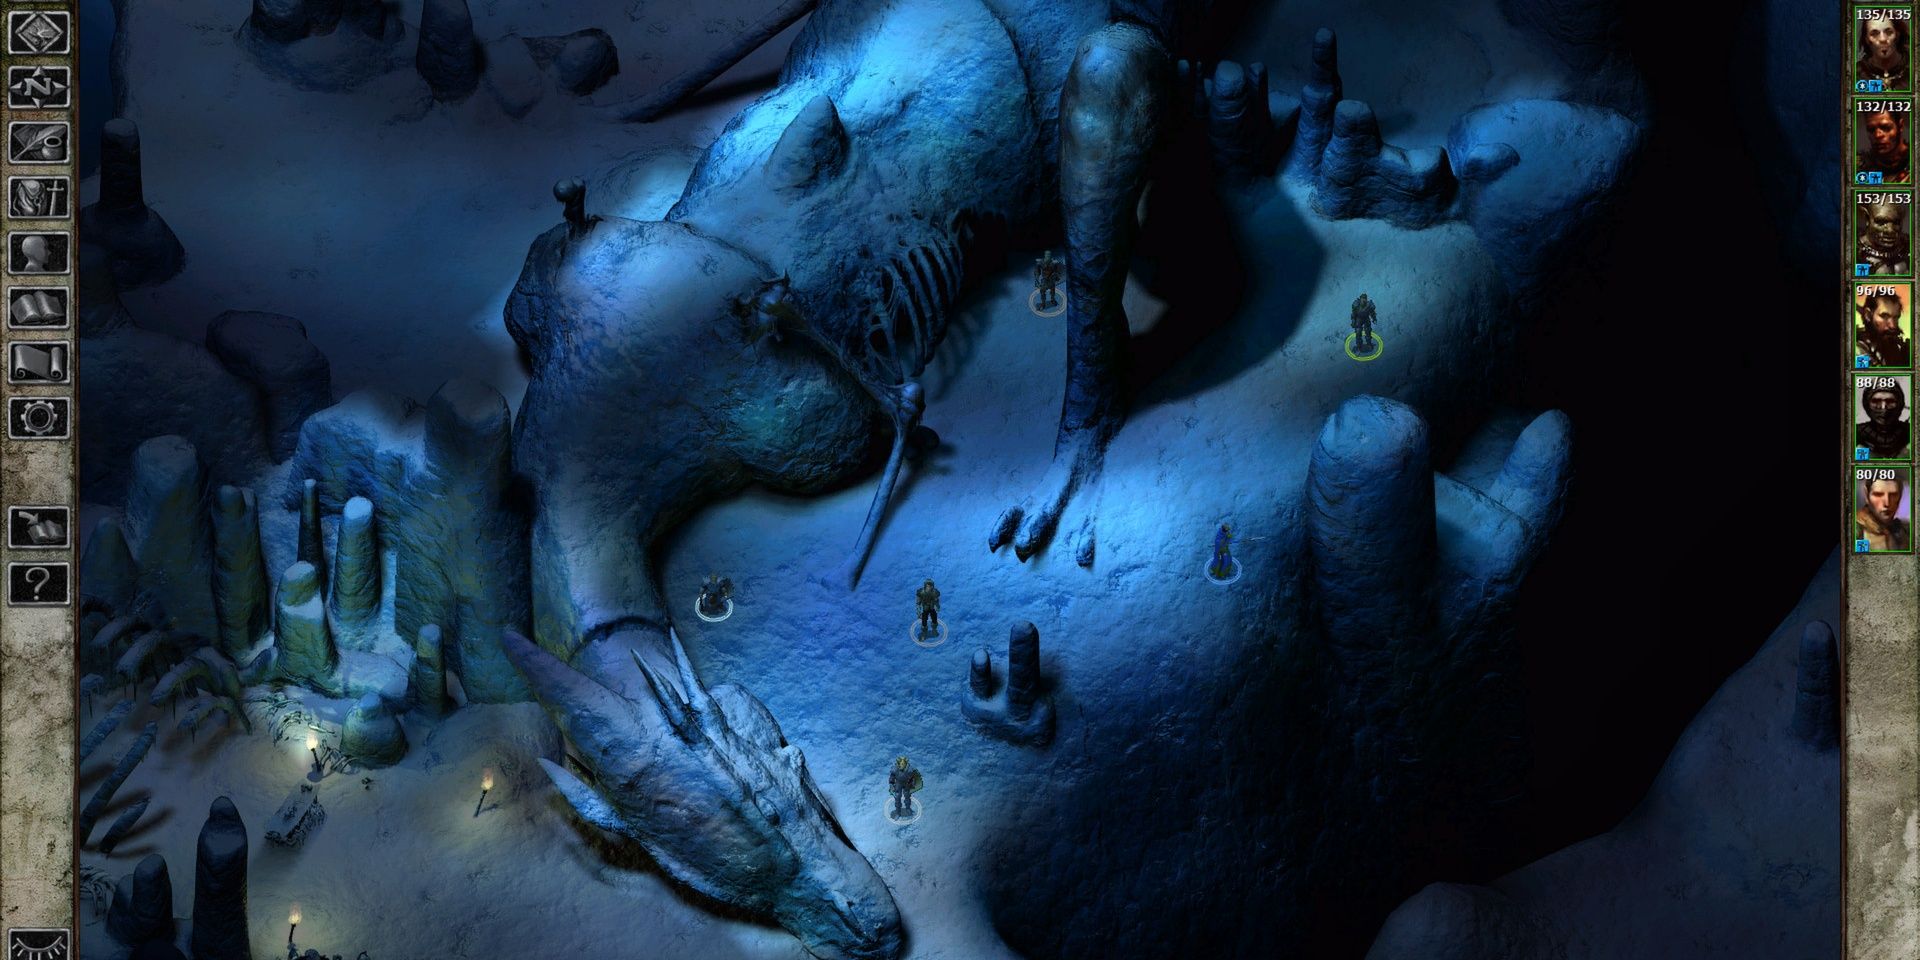 A screenshot showing gameplay in Icewind Dale: Enhanced Edition